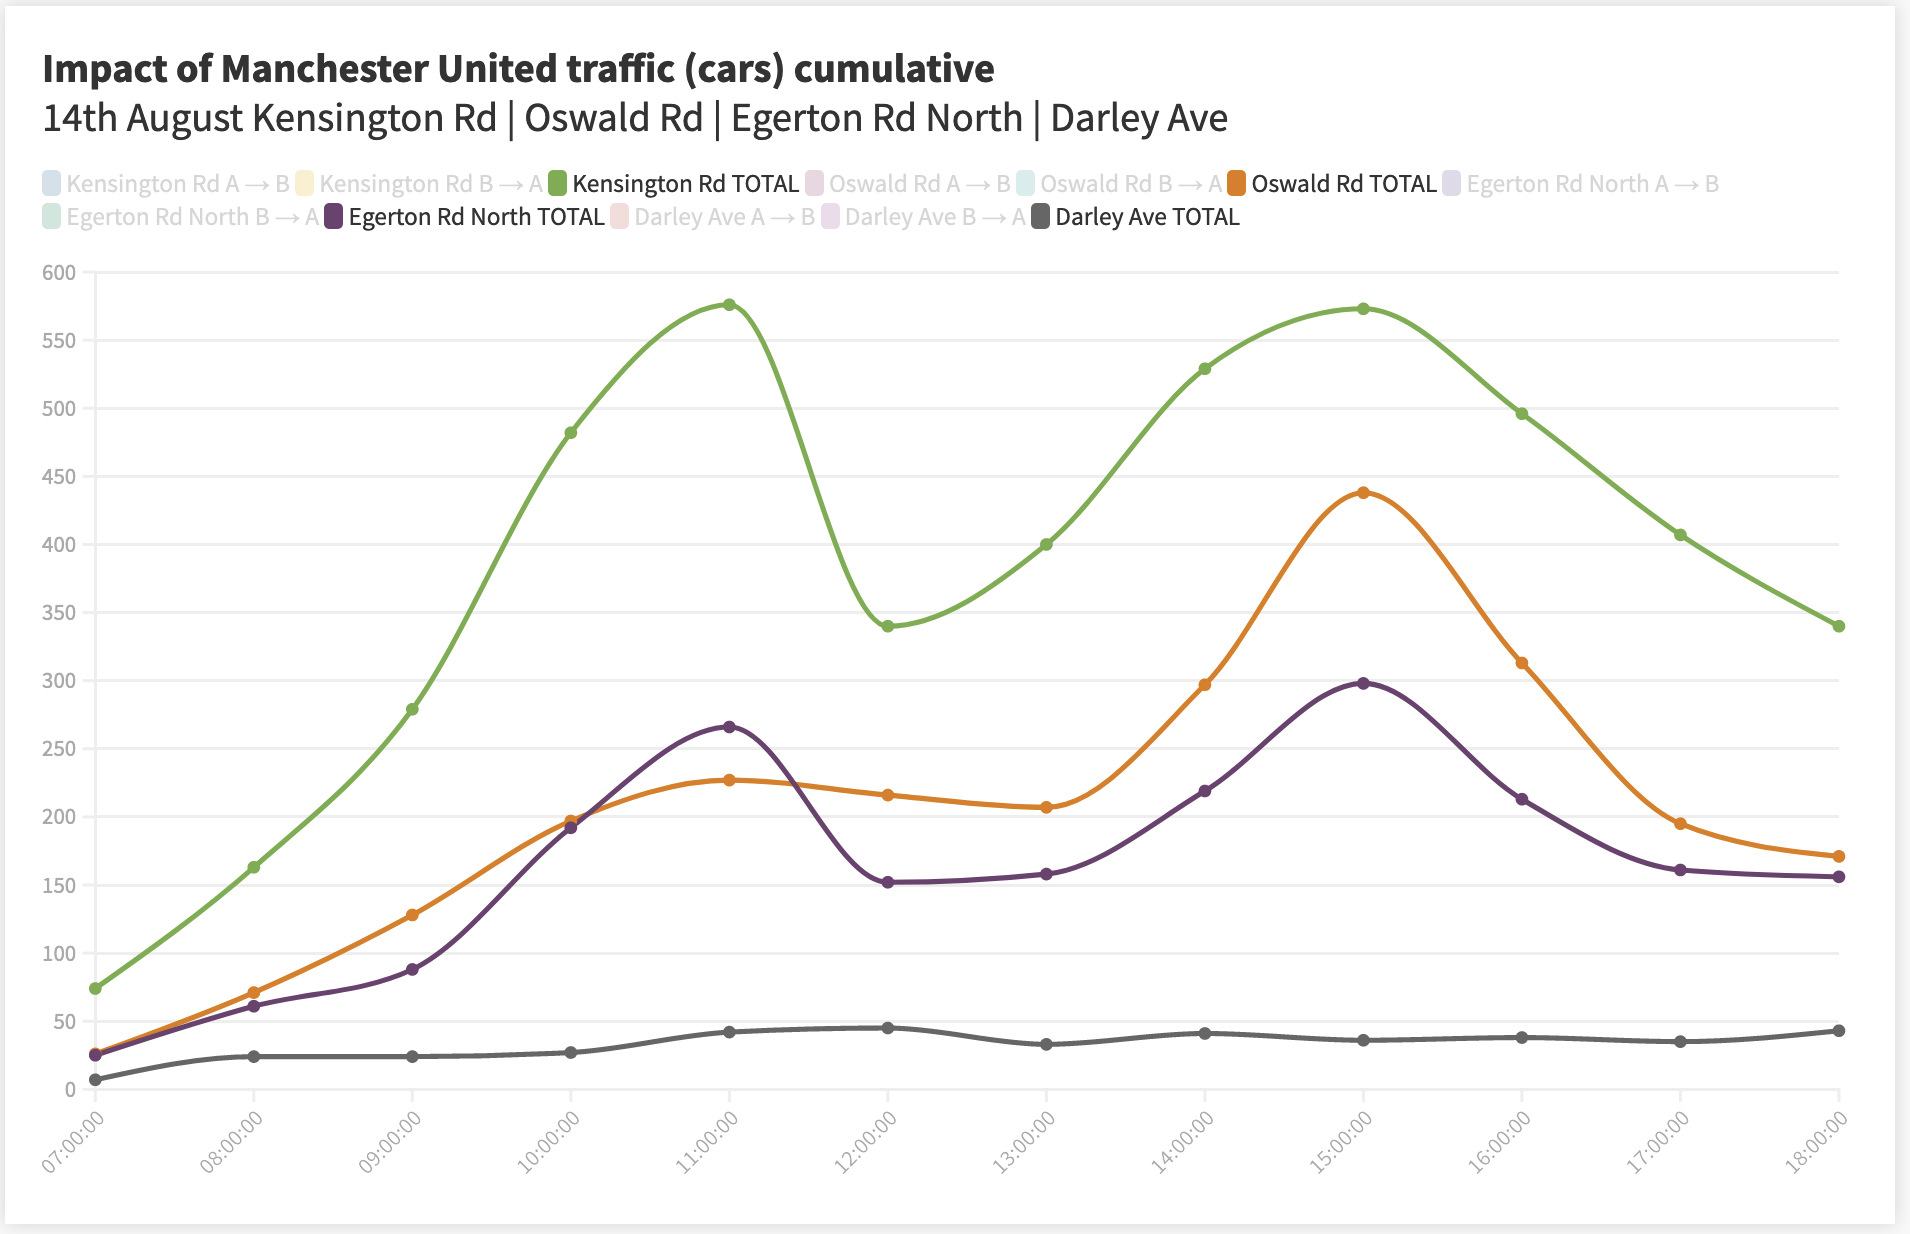 A graph showing the impact of Manchester United football traffic on all four roads